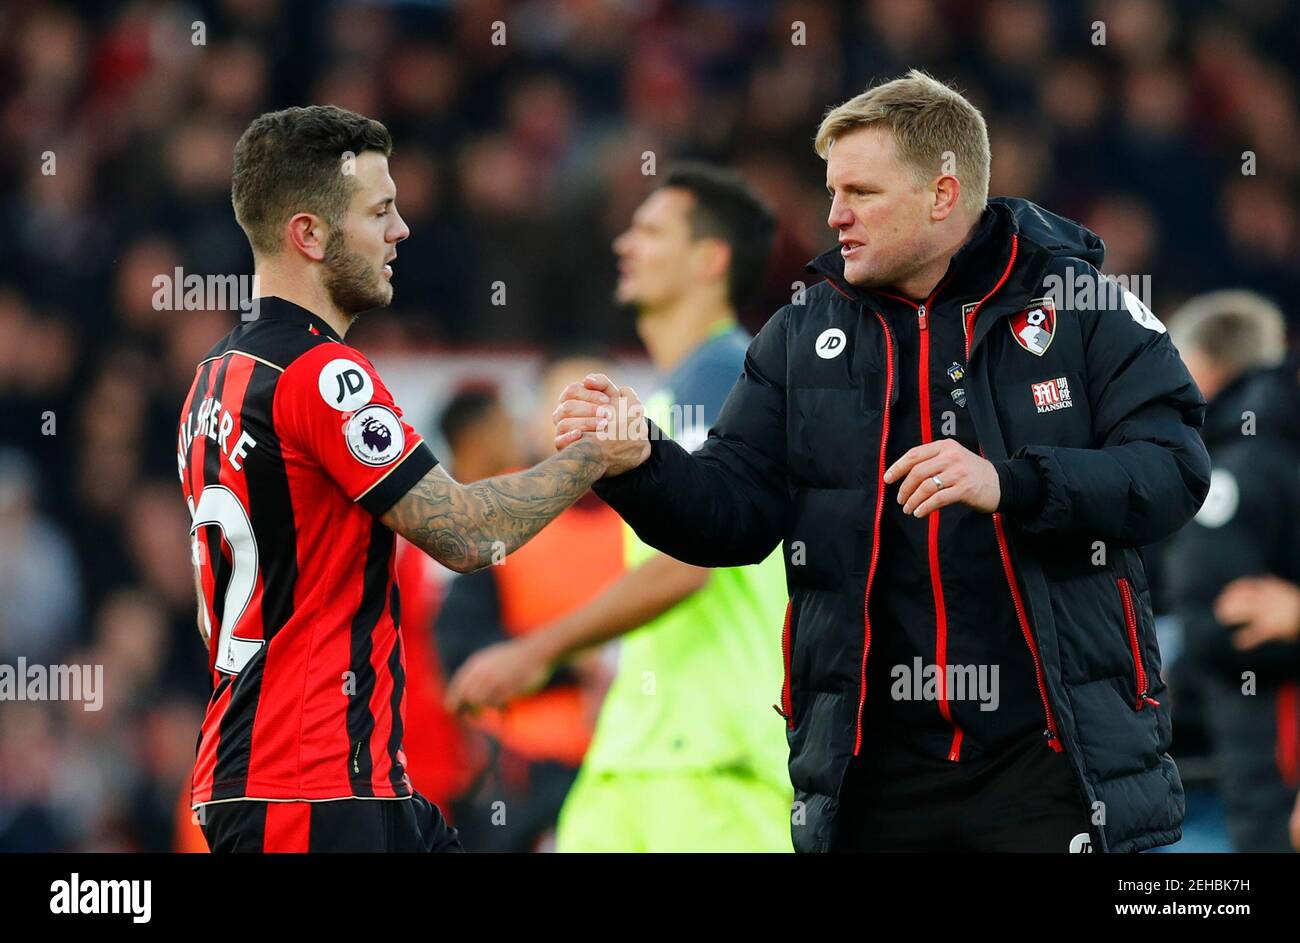 Football Soccer Britain - AFC Bournemouth v Liverpool - Premier League - Vitality Stadium - 4/12/16 Bournemouth manager Eddie Howe shakes hands with Jack Wilshere  after the game  Reuters / Eddie Keogh Livepic EDITORIAL USE ONLY. No use with unauthorized audio, video, data, fixture lists, club/league logos or "live" services. Online in-match use limited to 45 images, no video emulation. No use in betting, games or single club/league/player publications. Please contact your account representative for further details. Stock Photo